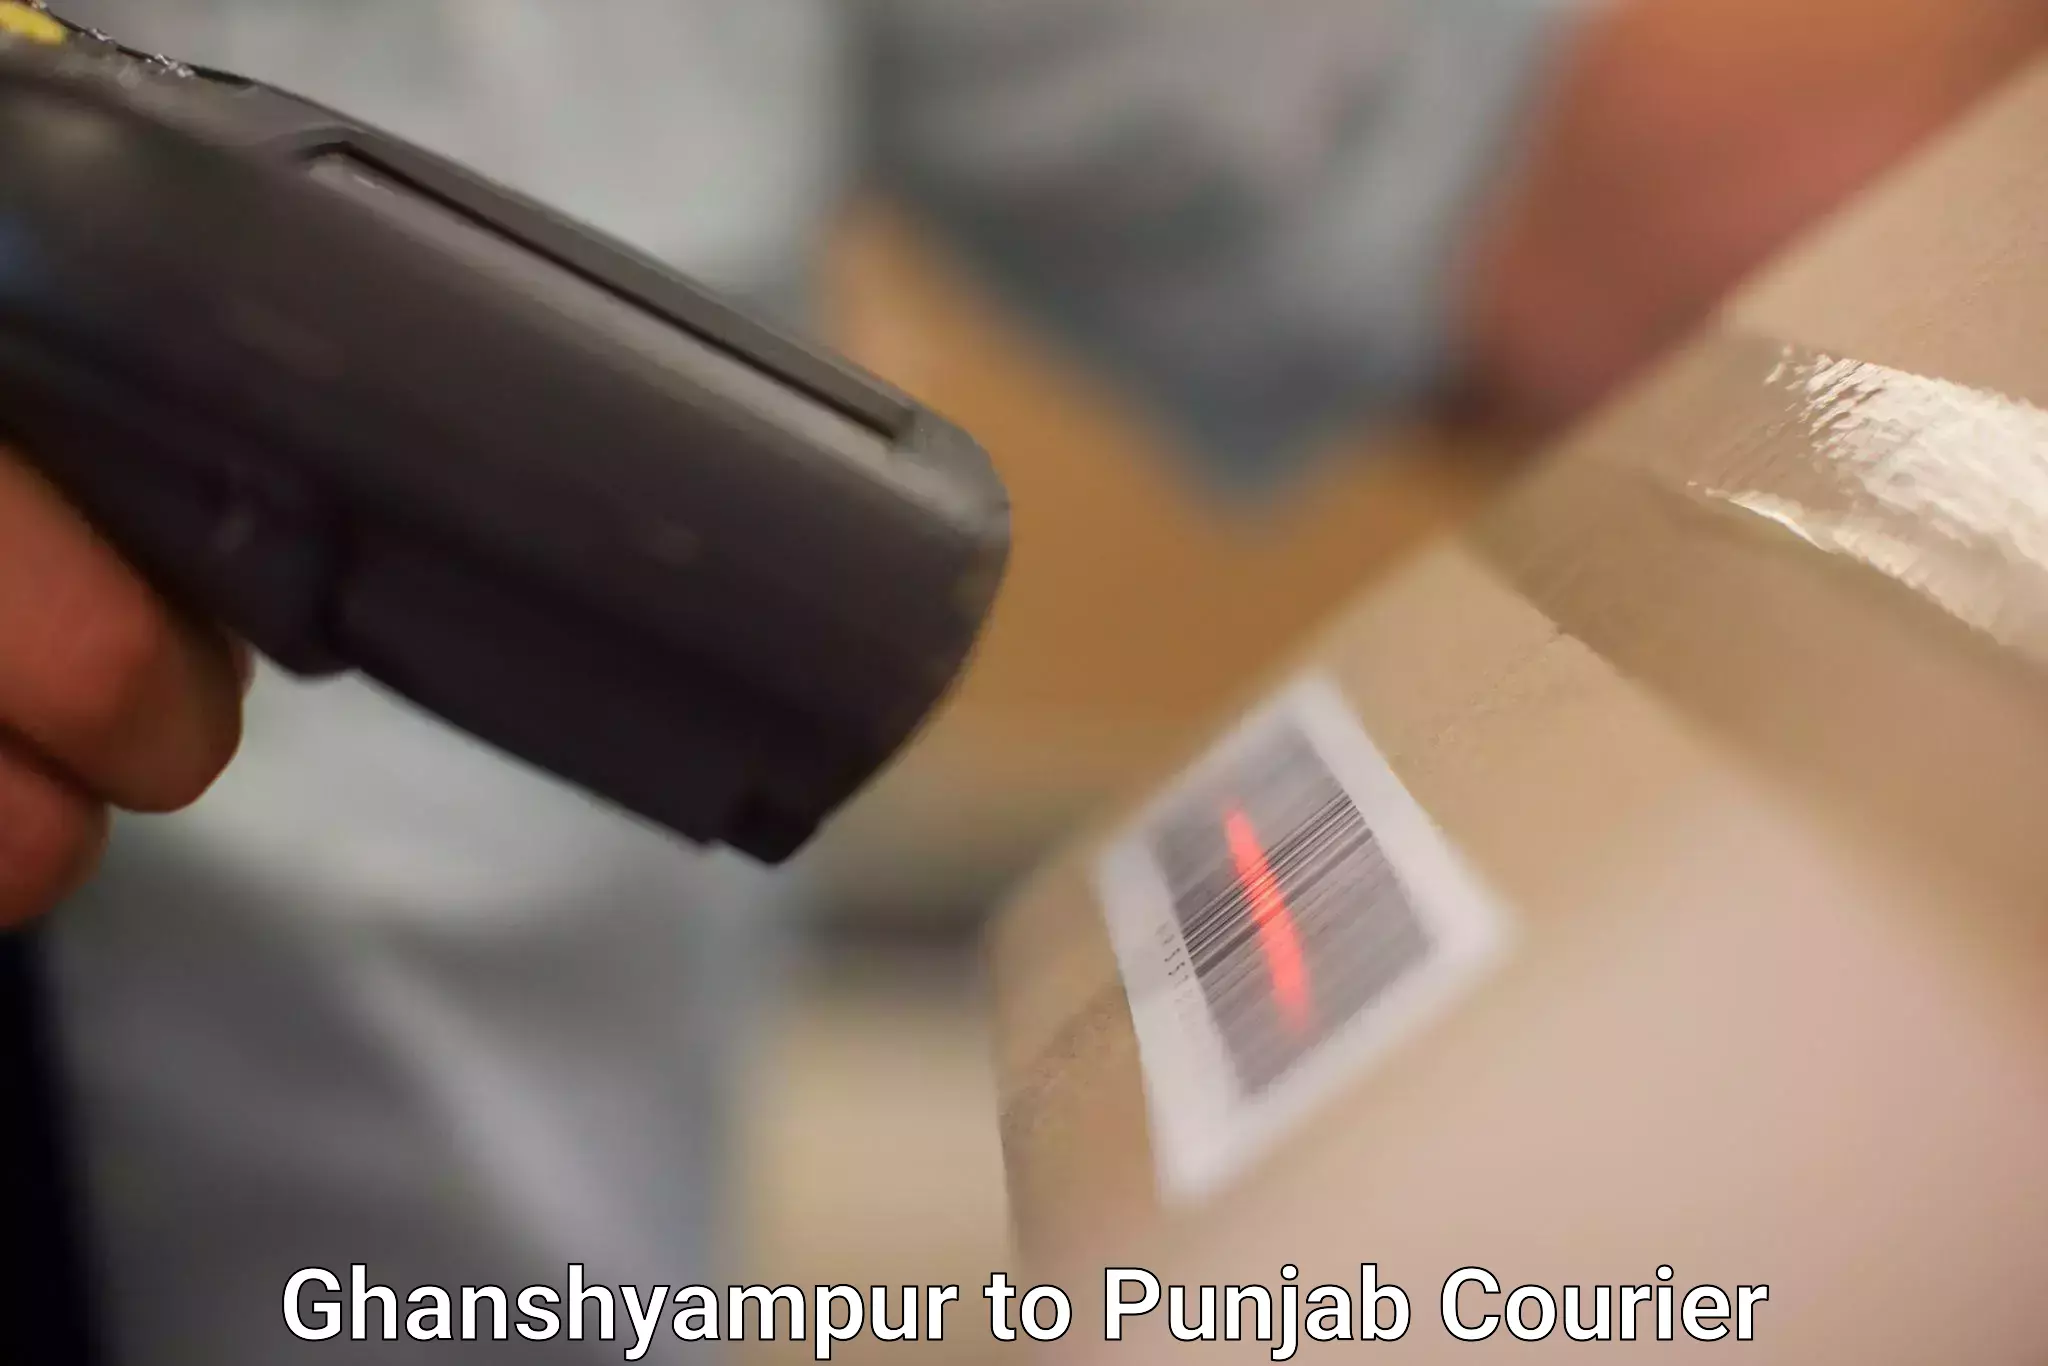 Easy access courier services Ghanshyampur to Batala